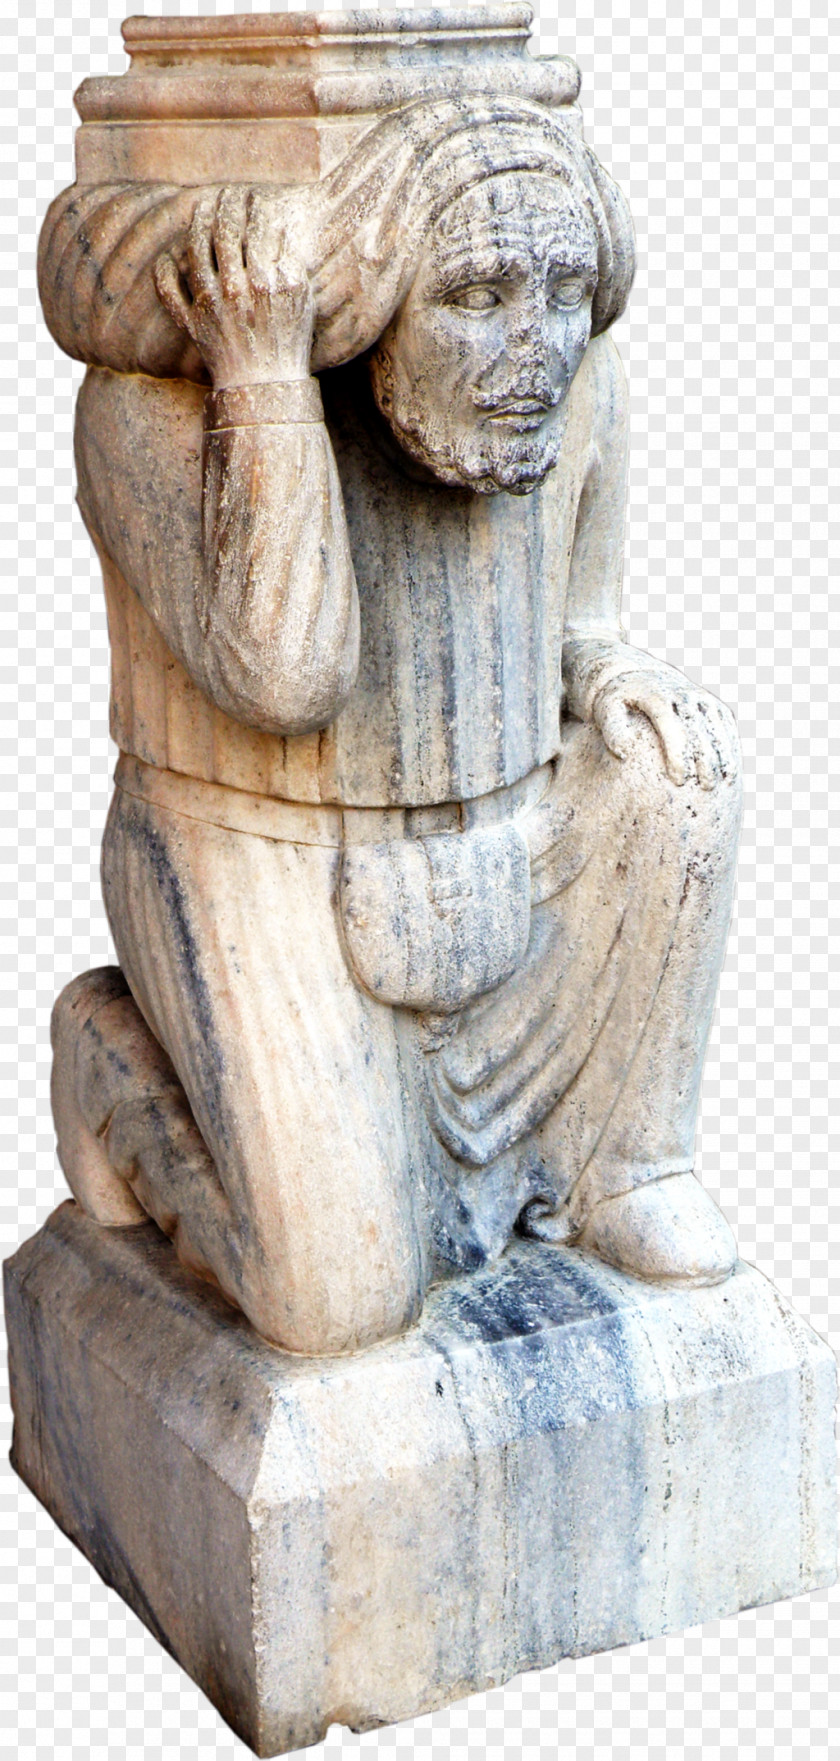 Statue Sculpture Art Stone Carving PNG